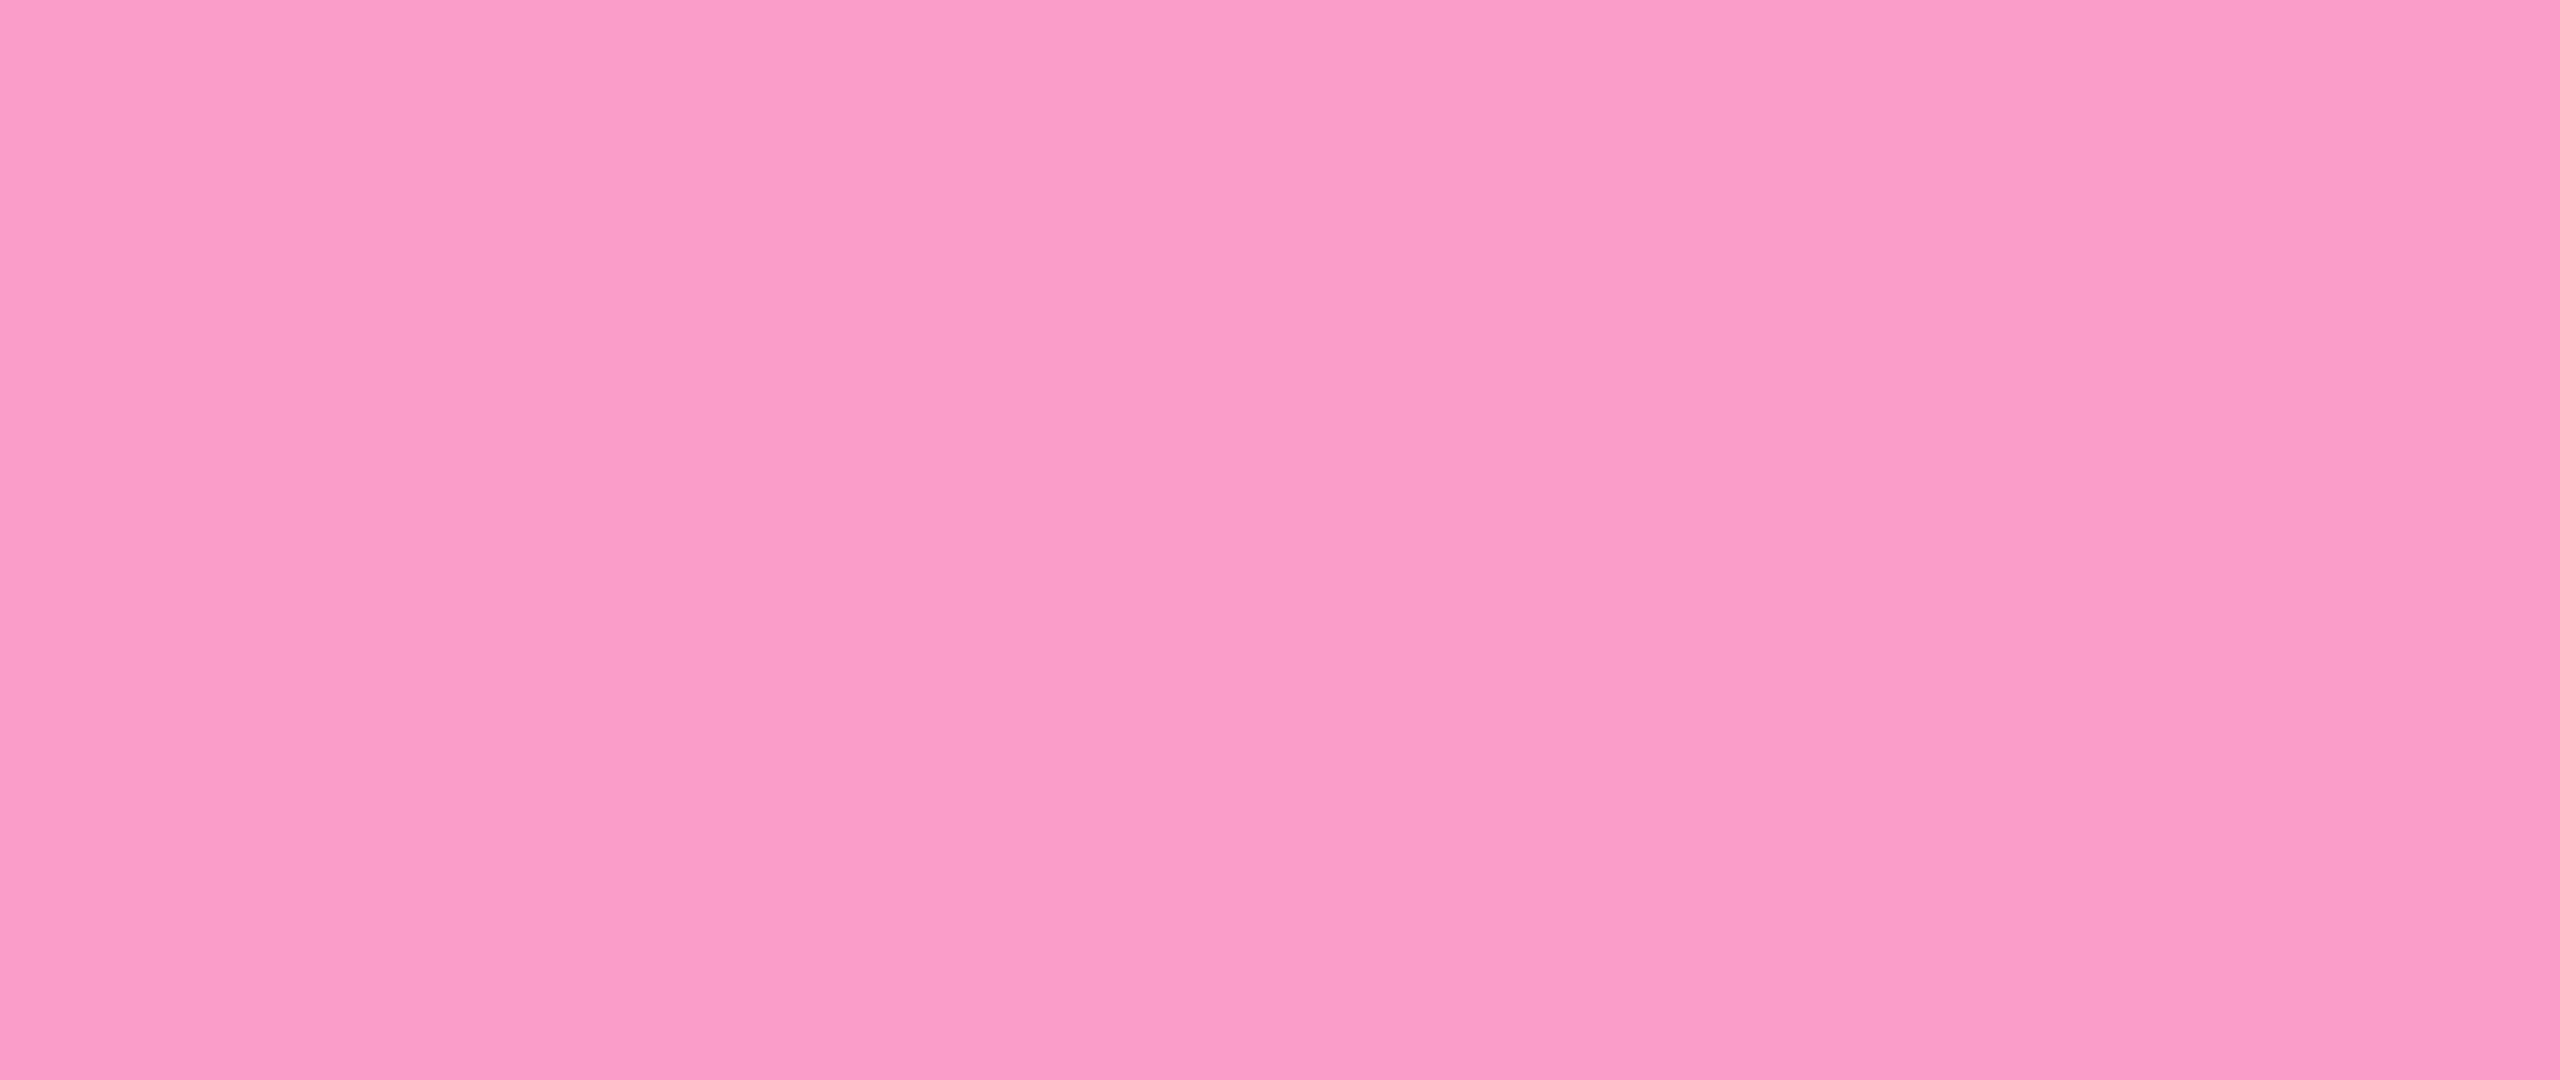 Download wallpaper 2560x1080 pink, color, background dual wide ...